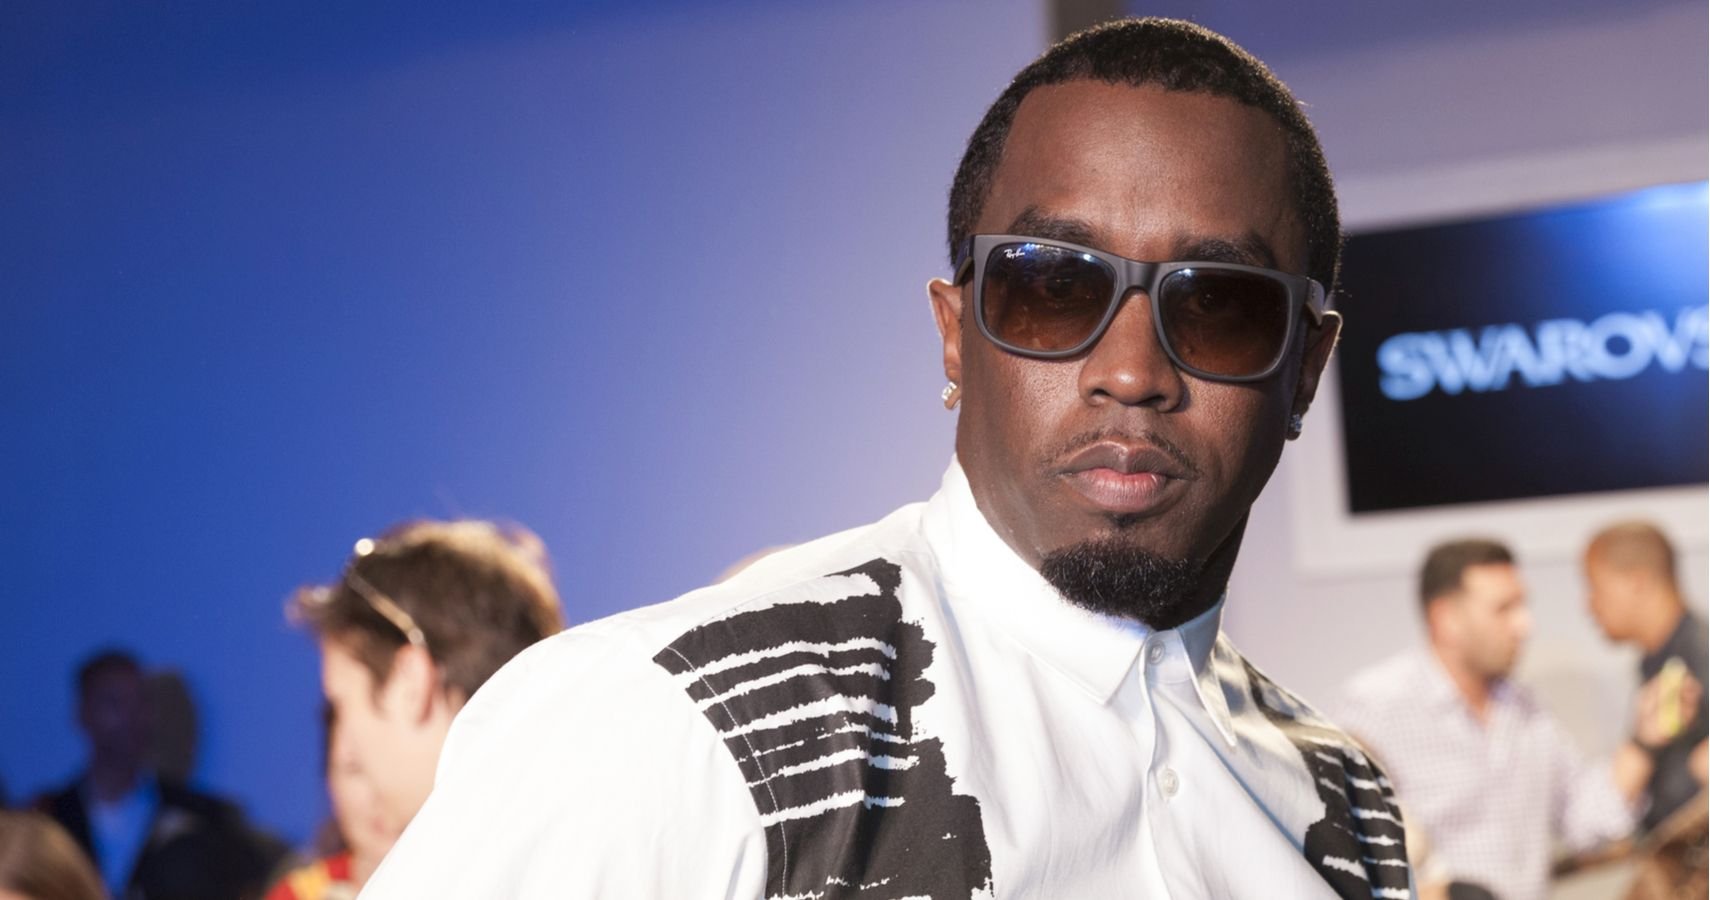 Diddy's Toys: The 10 Most Expensive Purchases Of P. Diddy